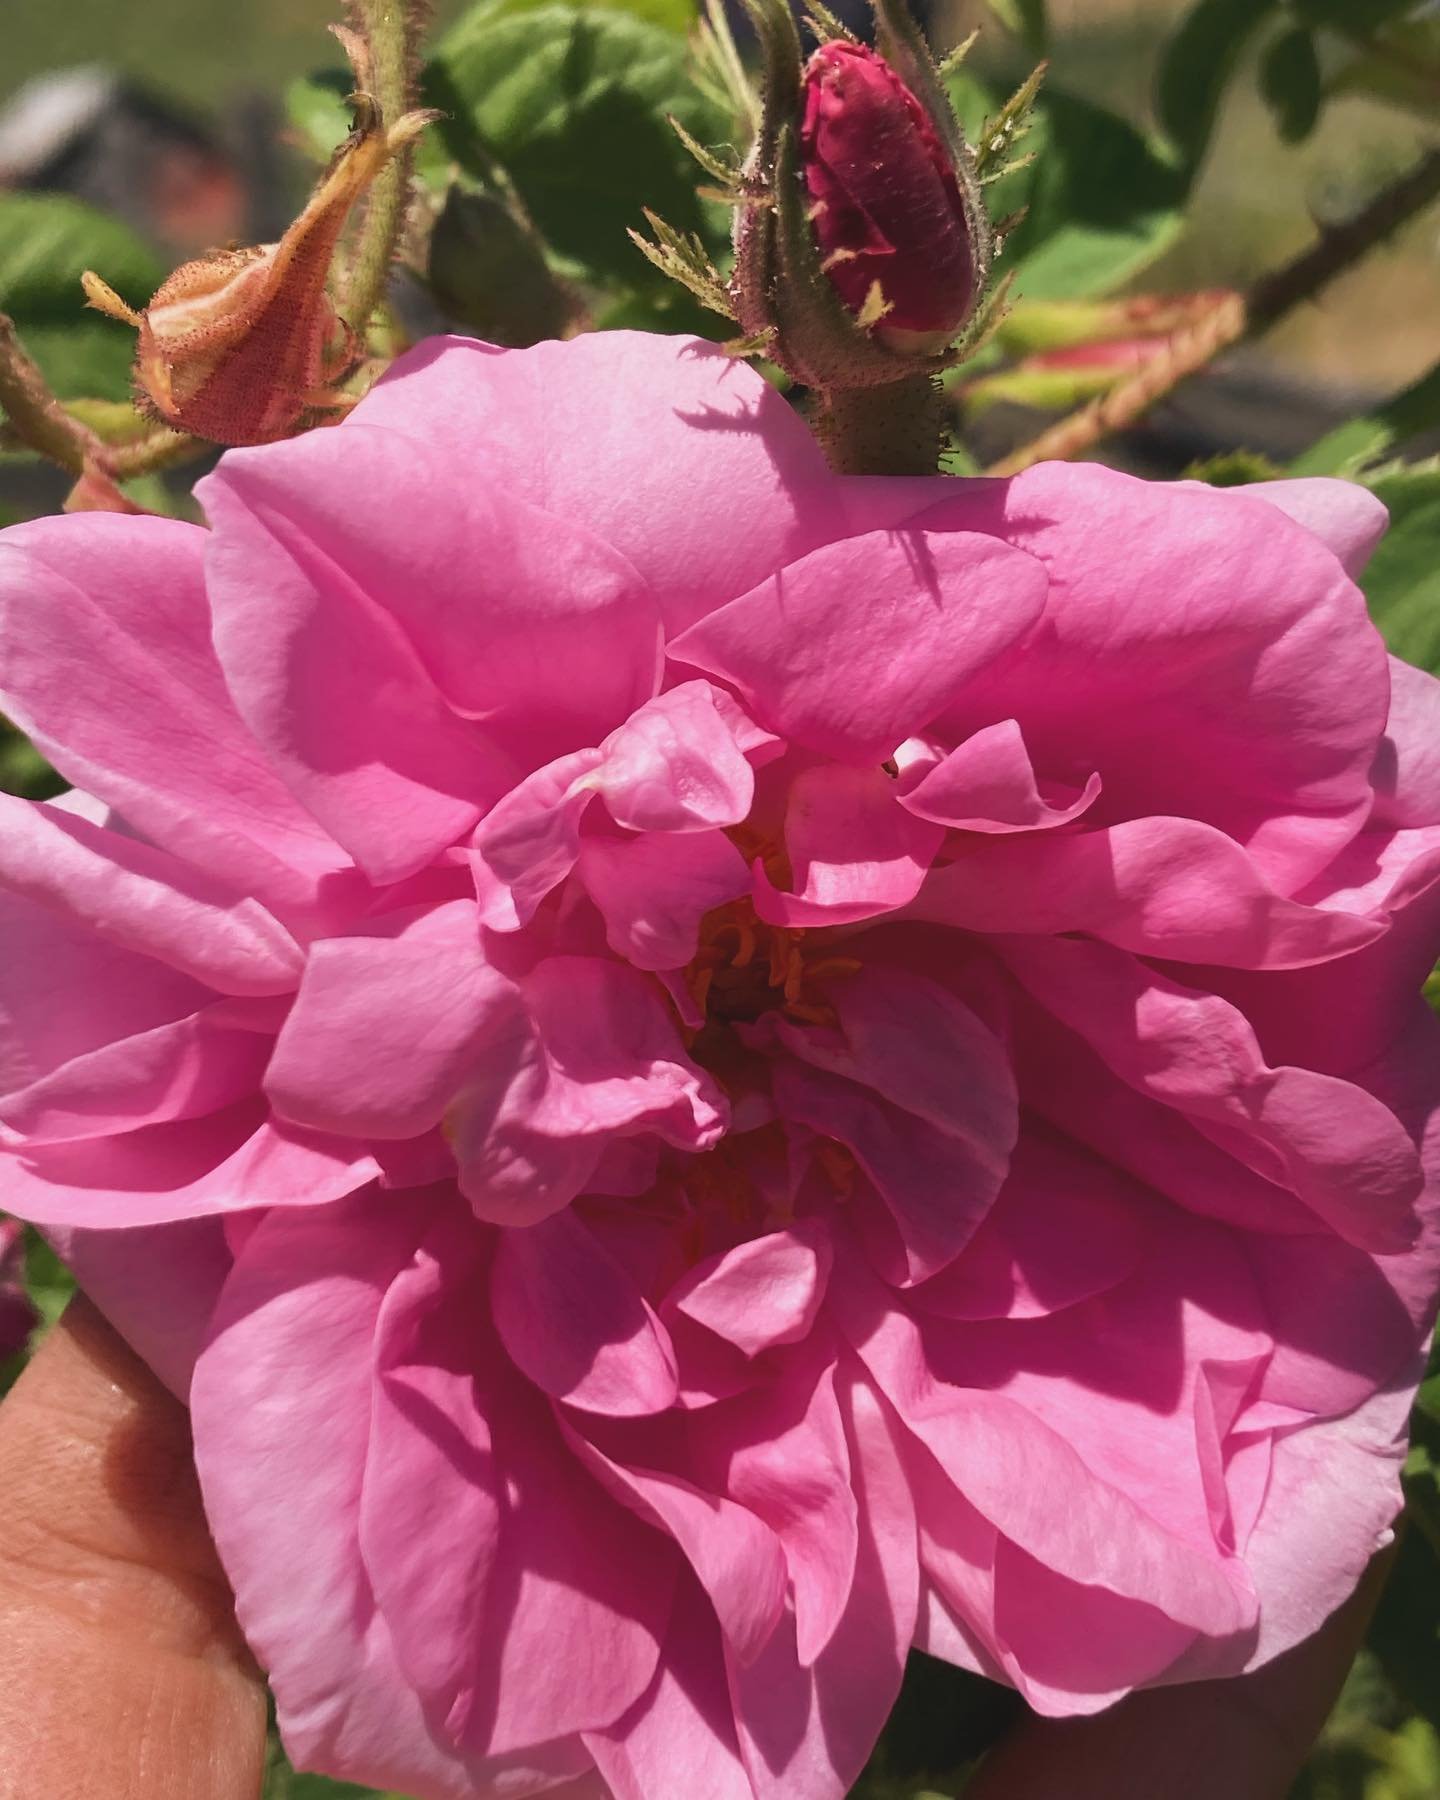 Rose medicine has been a potent ally for me this Spring. Inhaling the sweet scent, gazing into her blooming center and touching her silky petals quietly opened my Heart to a tenderness I&rsquo;ve been too guarded to feel. The healing power of Rose is